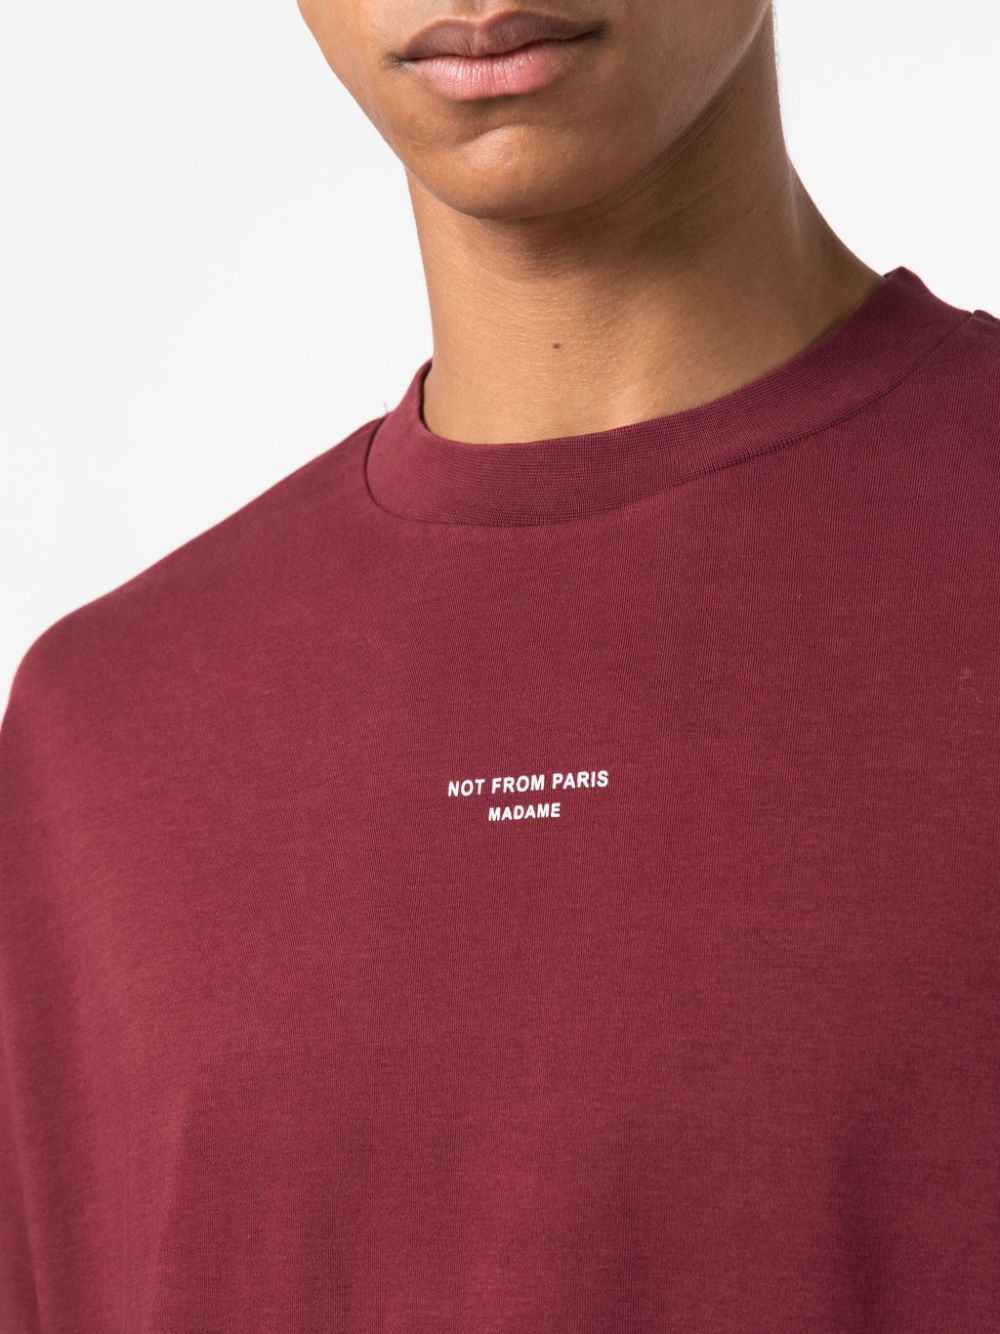 Burgundy t-shirt with logo on the chest